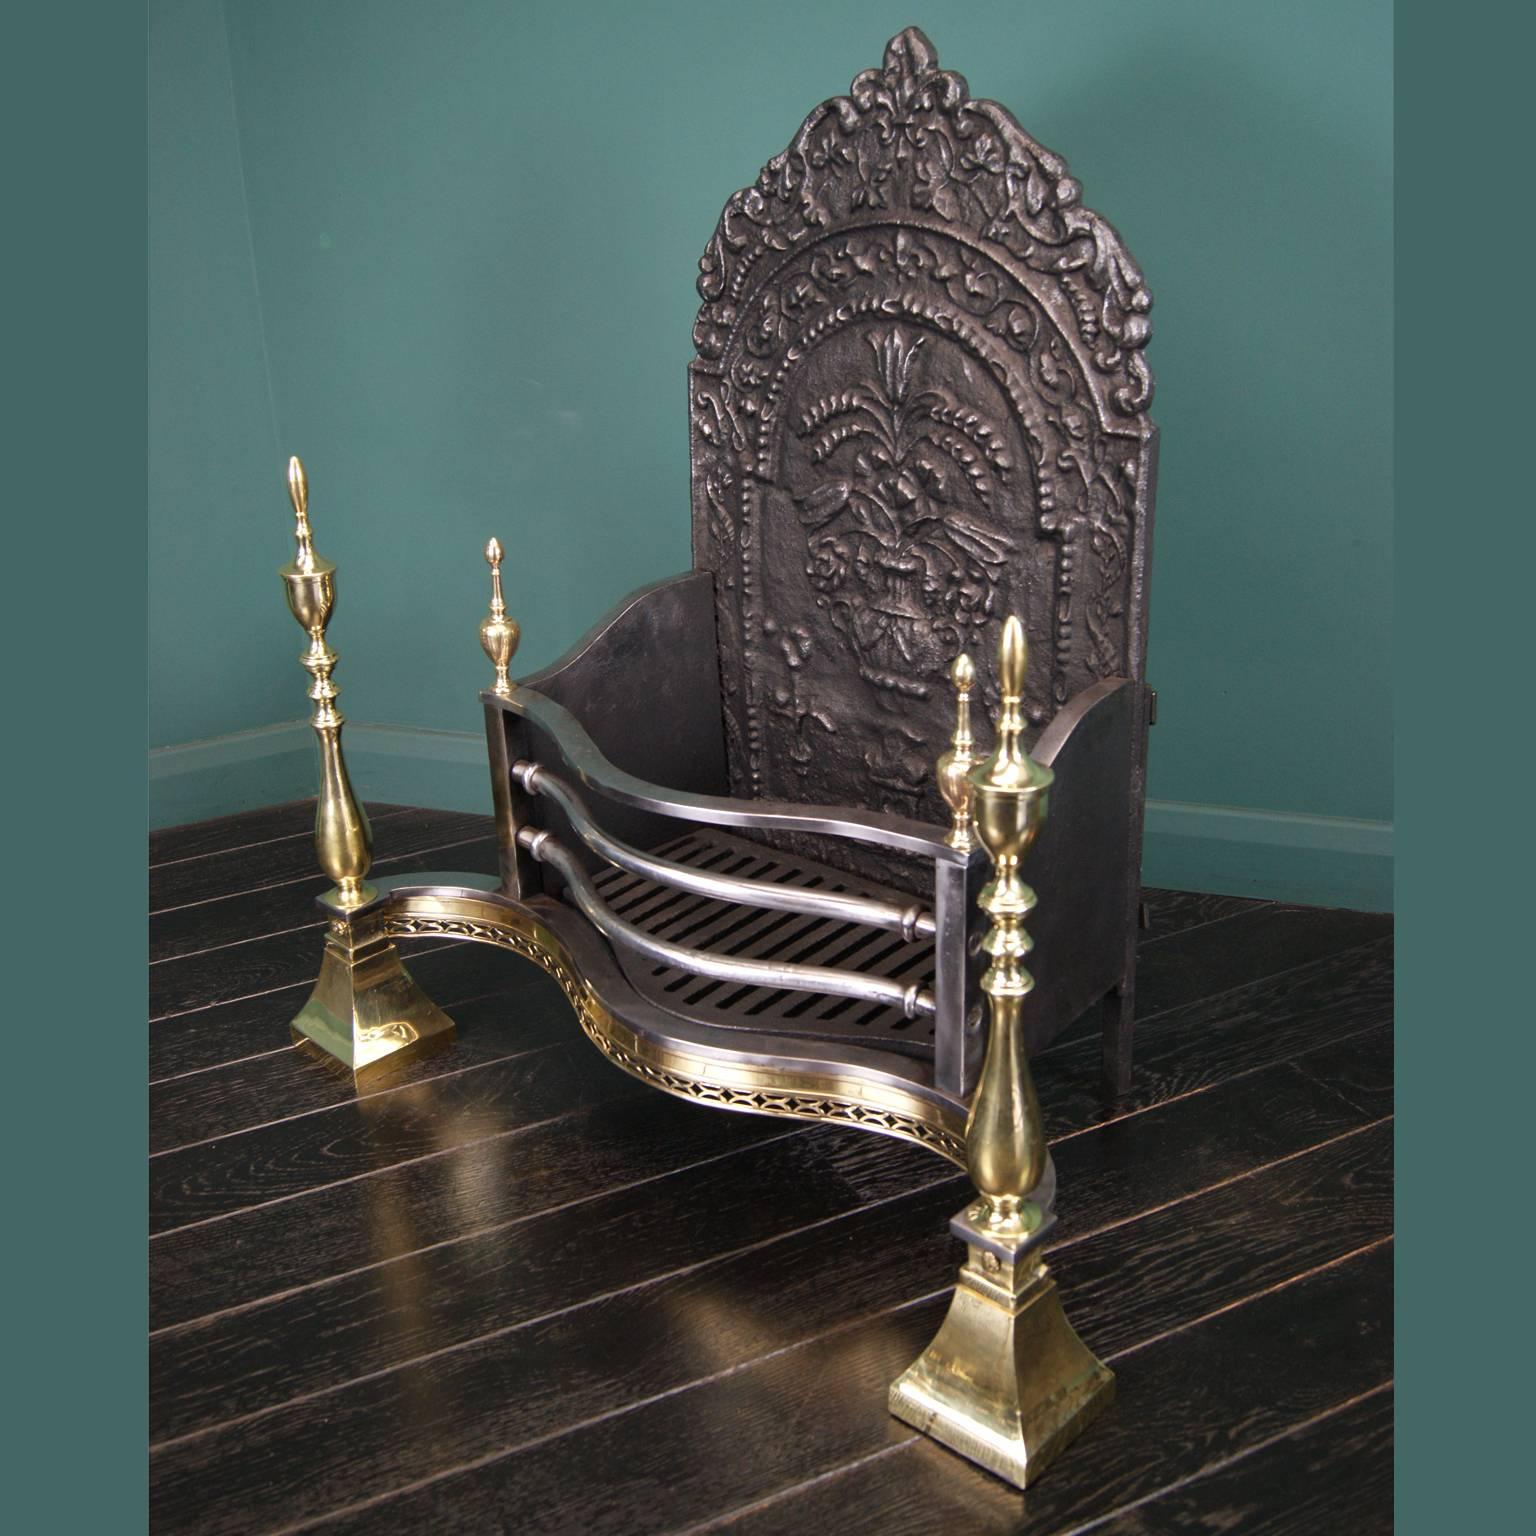 A late 19th century brass and steel dog fireplace, grate with polished steel fire bars, slim openwork brass fret and brass standards with tall urn finials. The shaped ornate fire back with vase and foliage detailing. Restored. 

